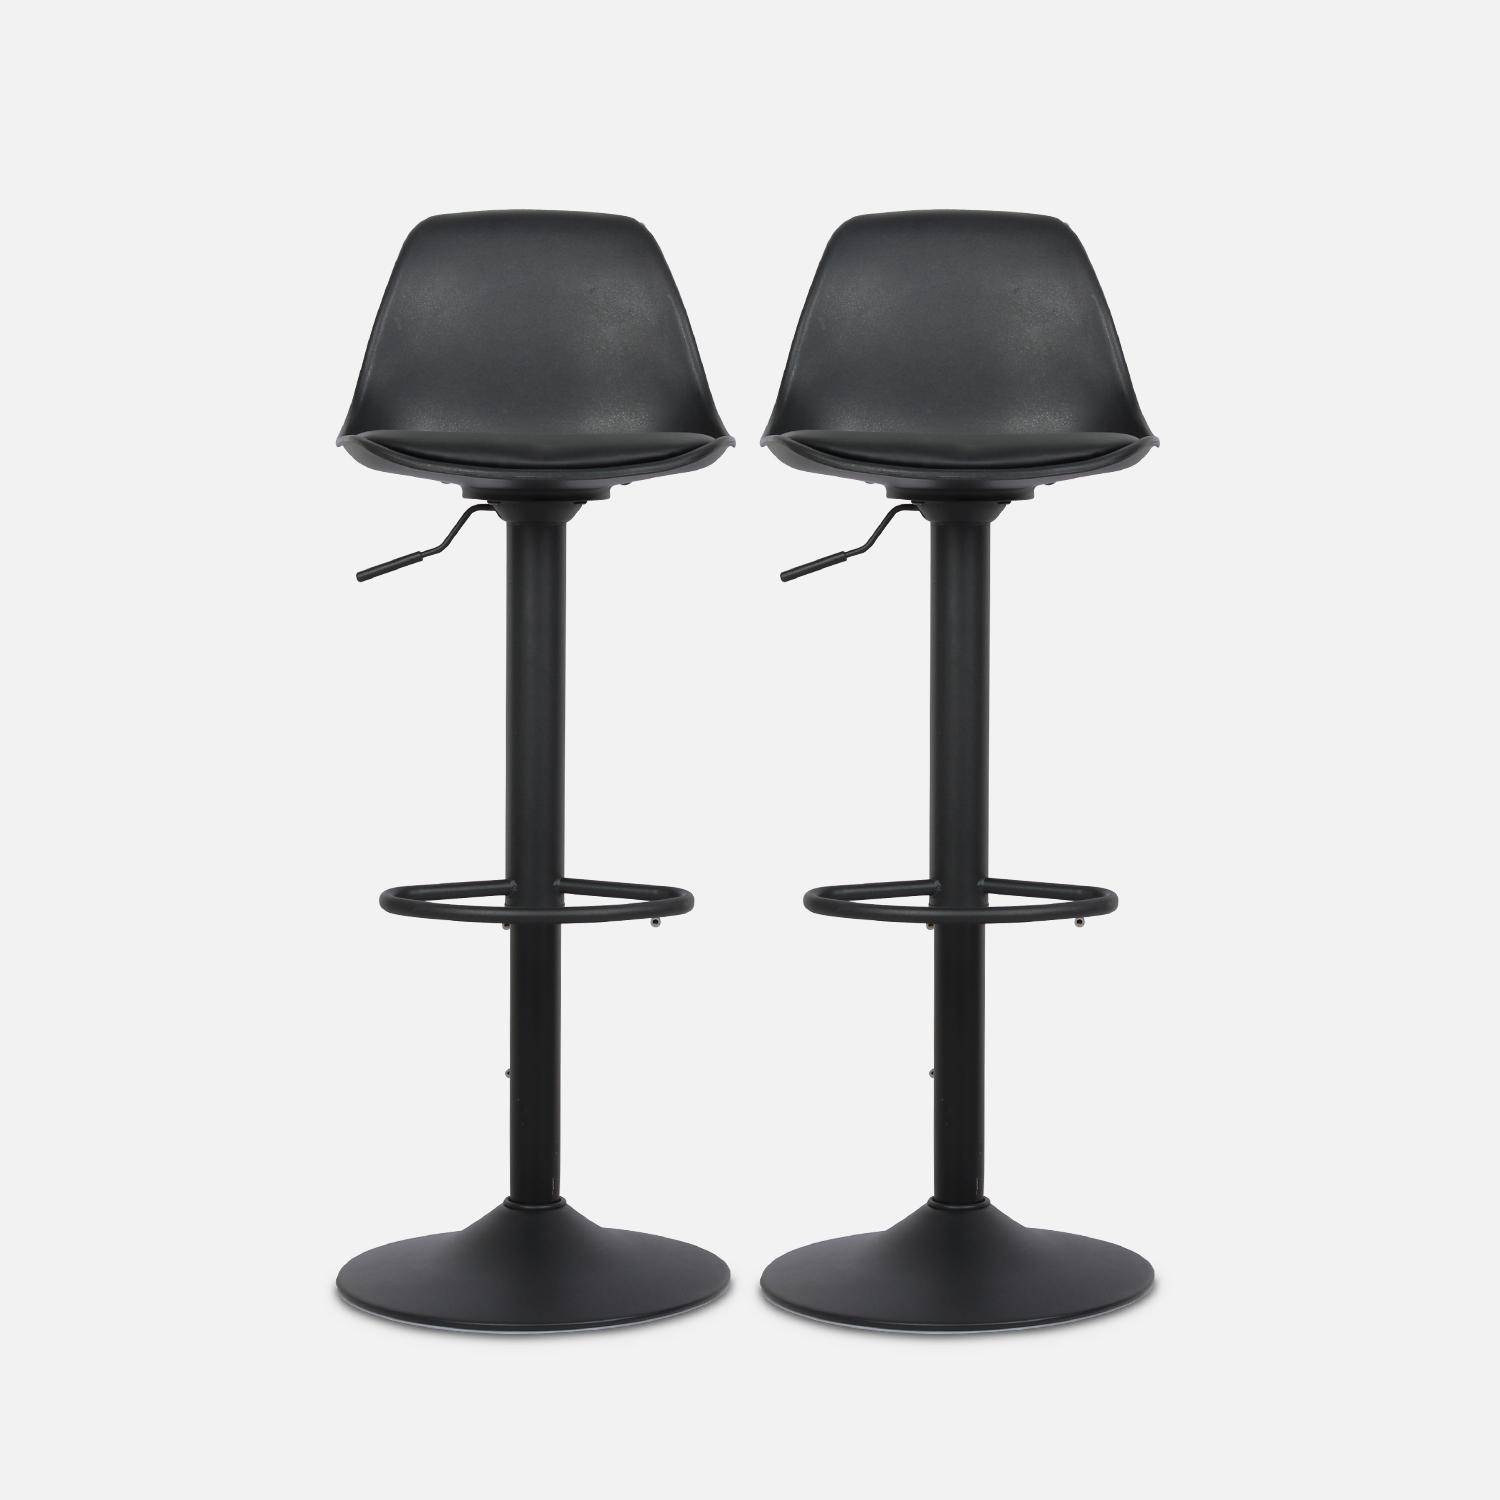 Pair of faux leather, rounded backrest, adjustable bar stools, seat height 61.5 - 83.5cm - Noah - Black,sweeek,Photo4